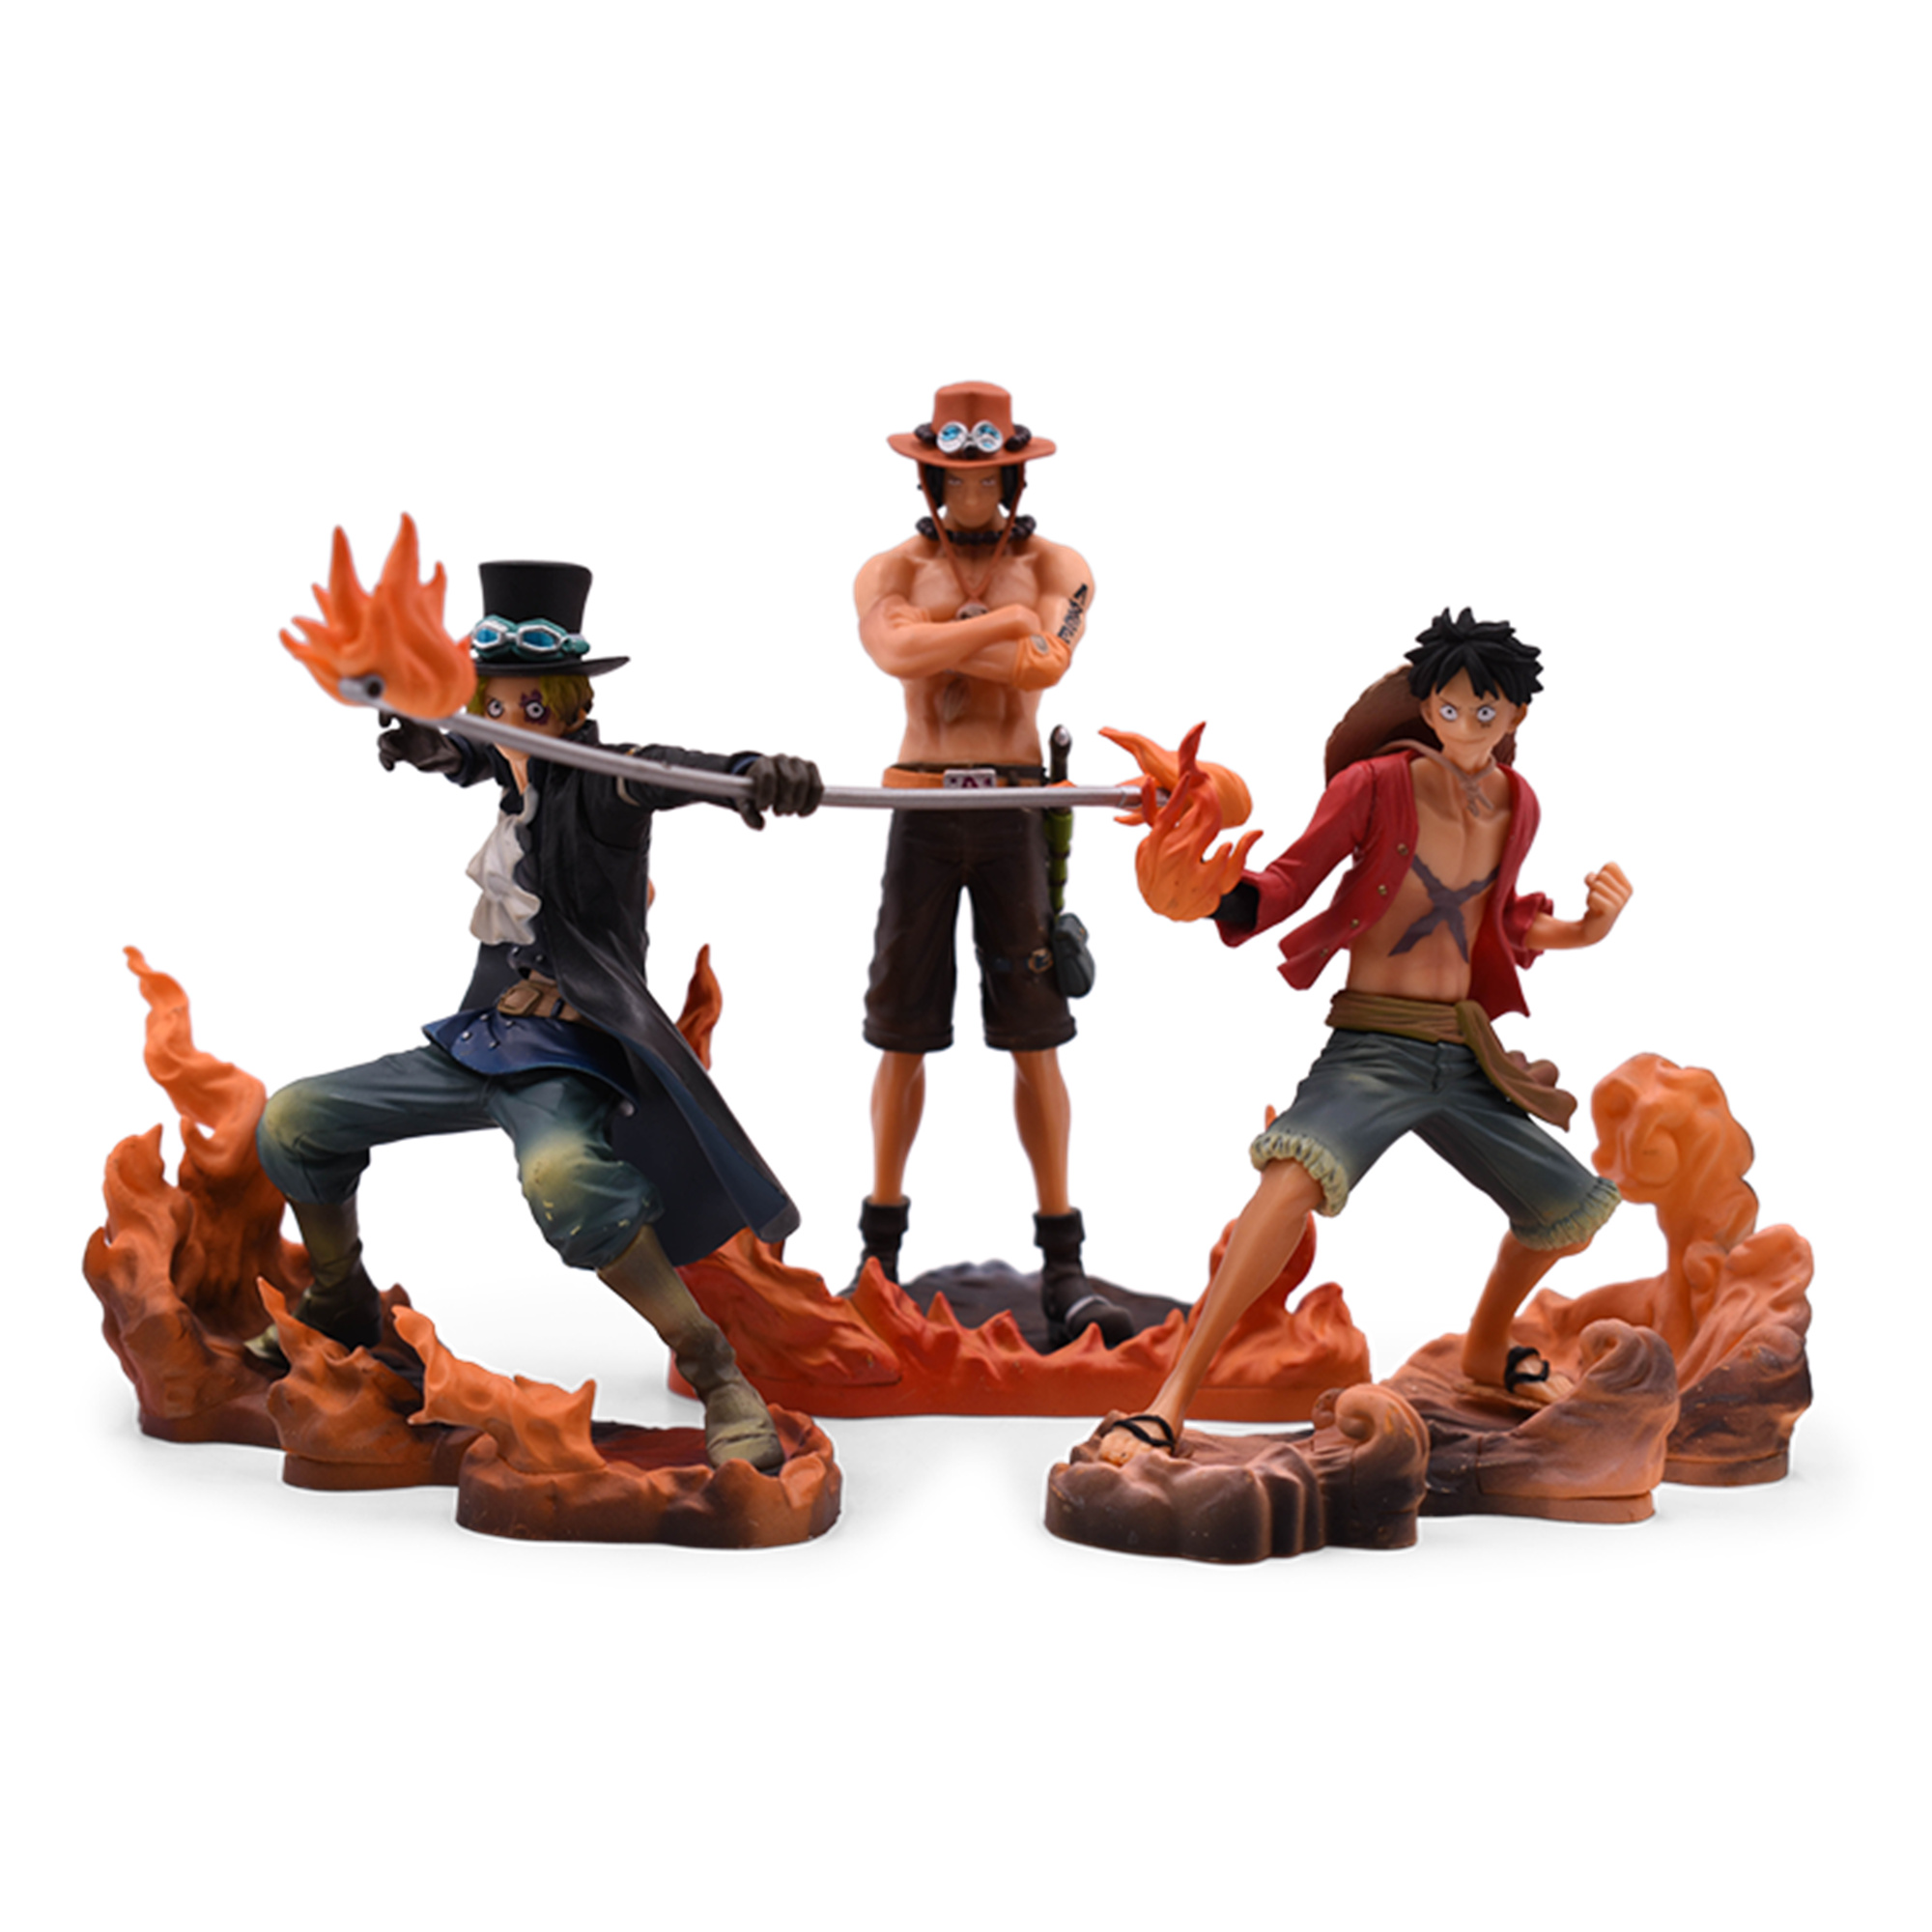 One Piece Model Toys: Recreate Epic Moments from the Series